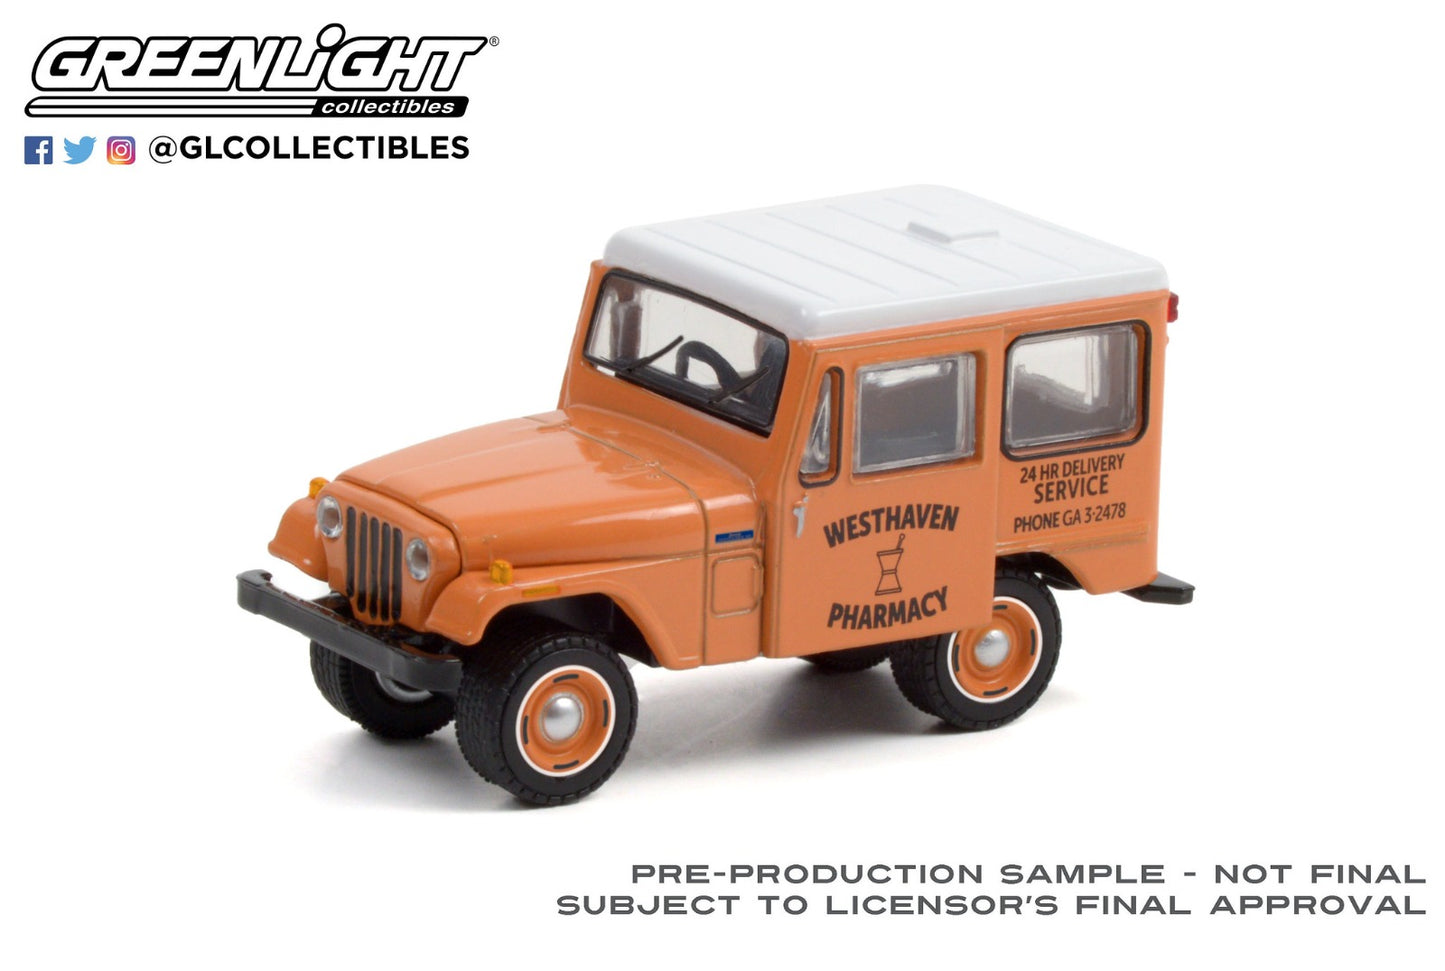 GreenLight 1:64 Blue Collar Collection Series 9 - 1974 Jeep DJ-5 - Westhaven Pharmacy 24 Hr. Delivery Service 35200-B